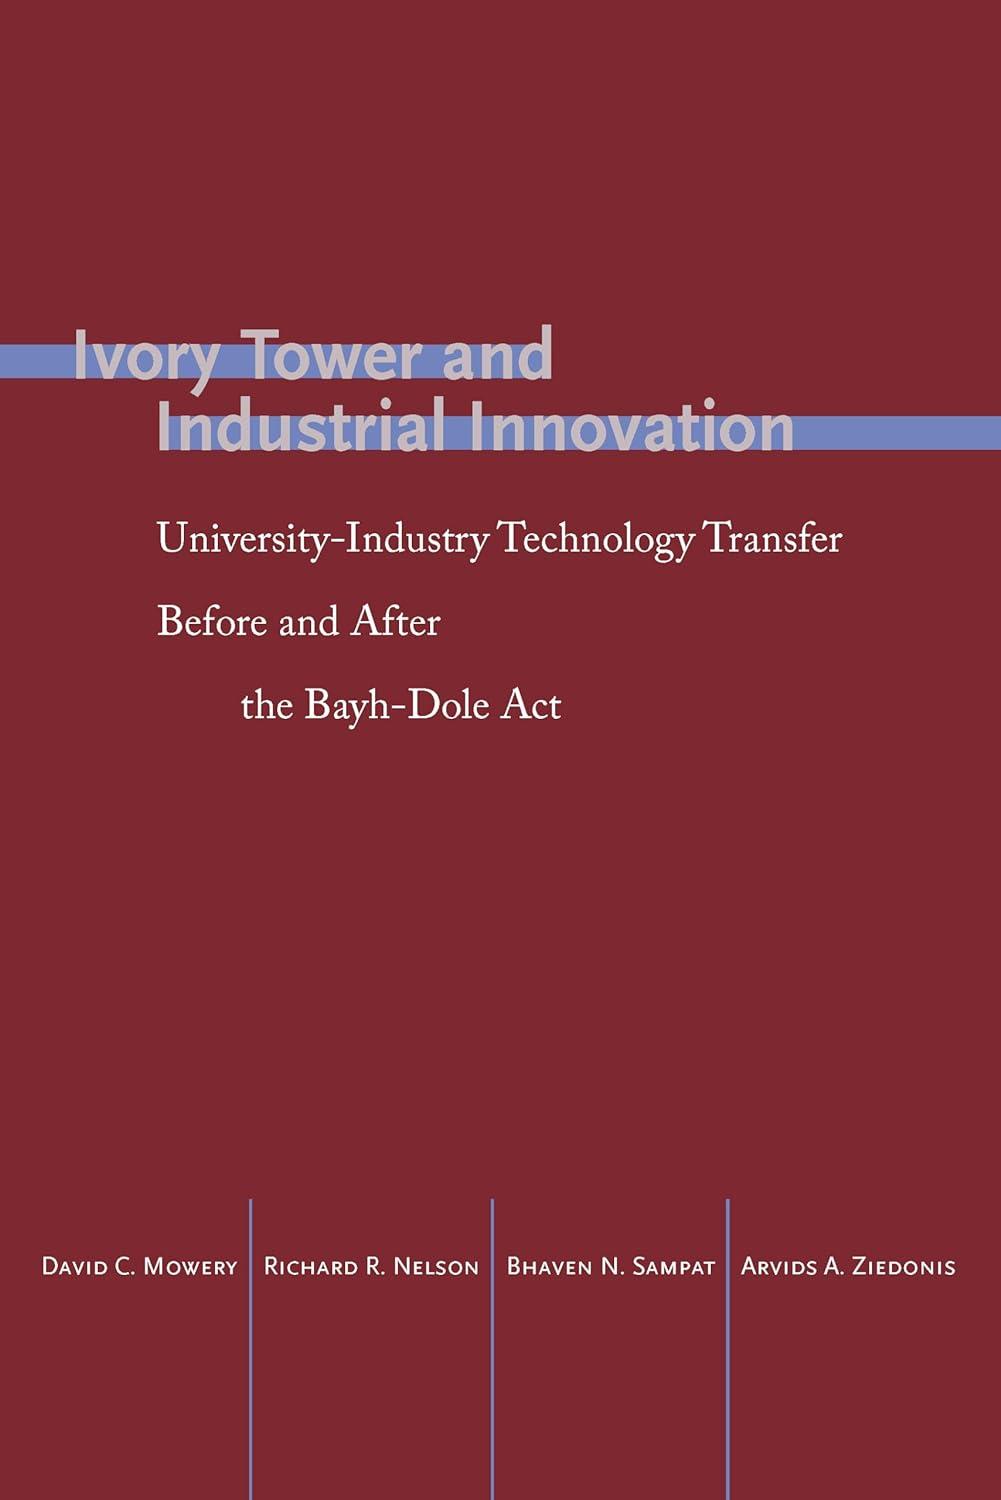 ivory tower and industrial innovation university industry technology transfer before and after the bayh dole